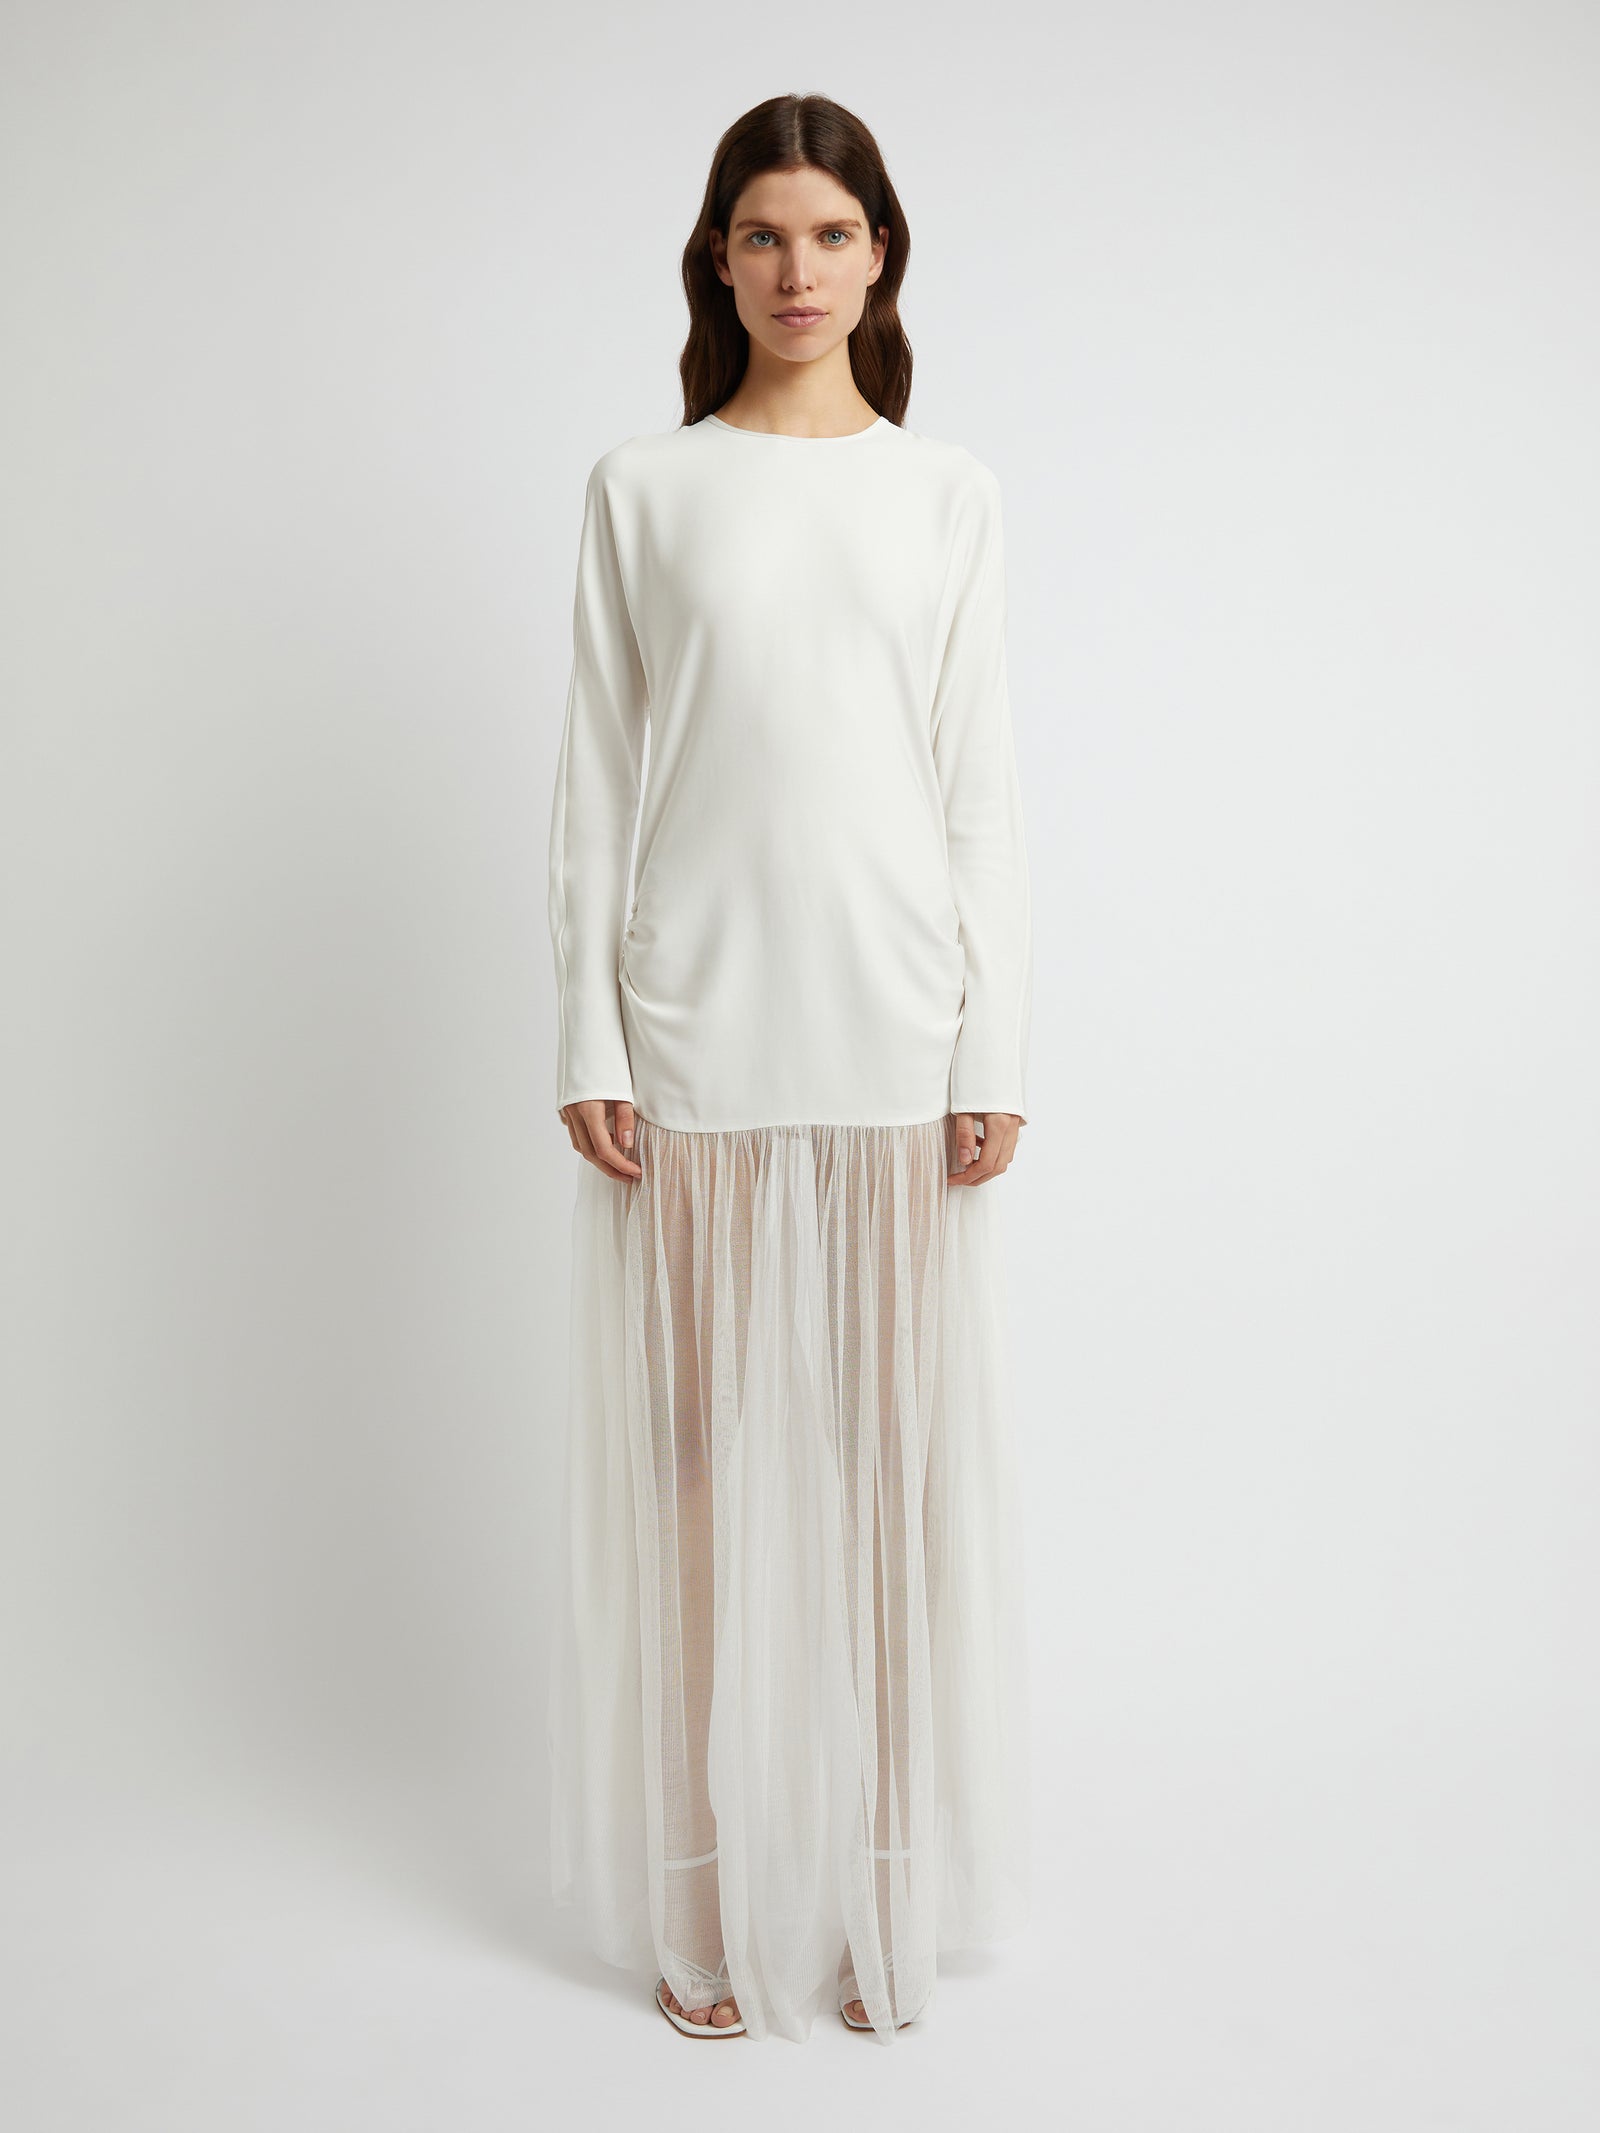 Semblance Ruched Tulle Long Sleeve Dress